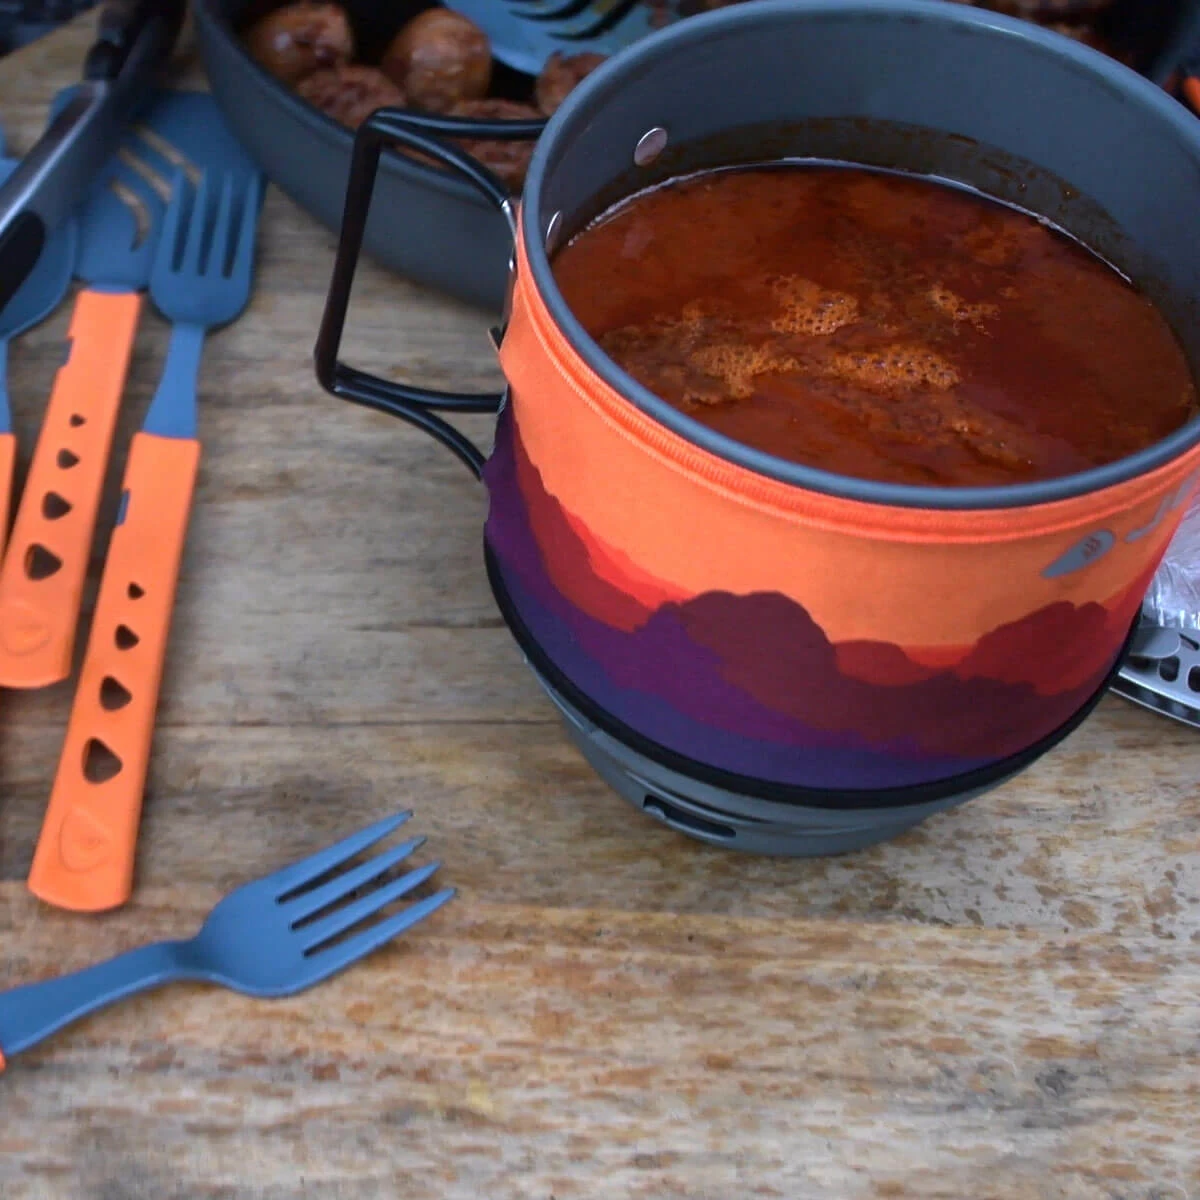 Chili cooked in the Jetboil MiniMo cooking system